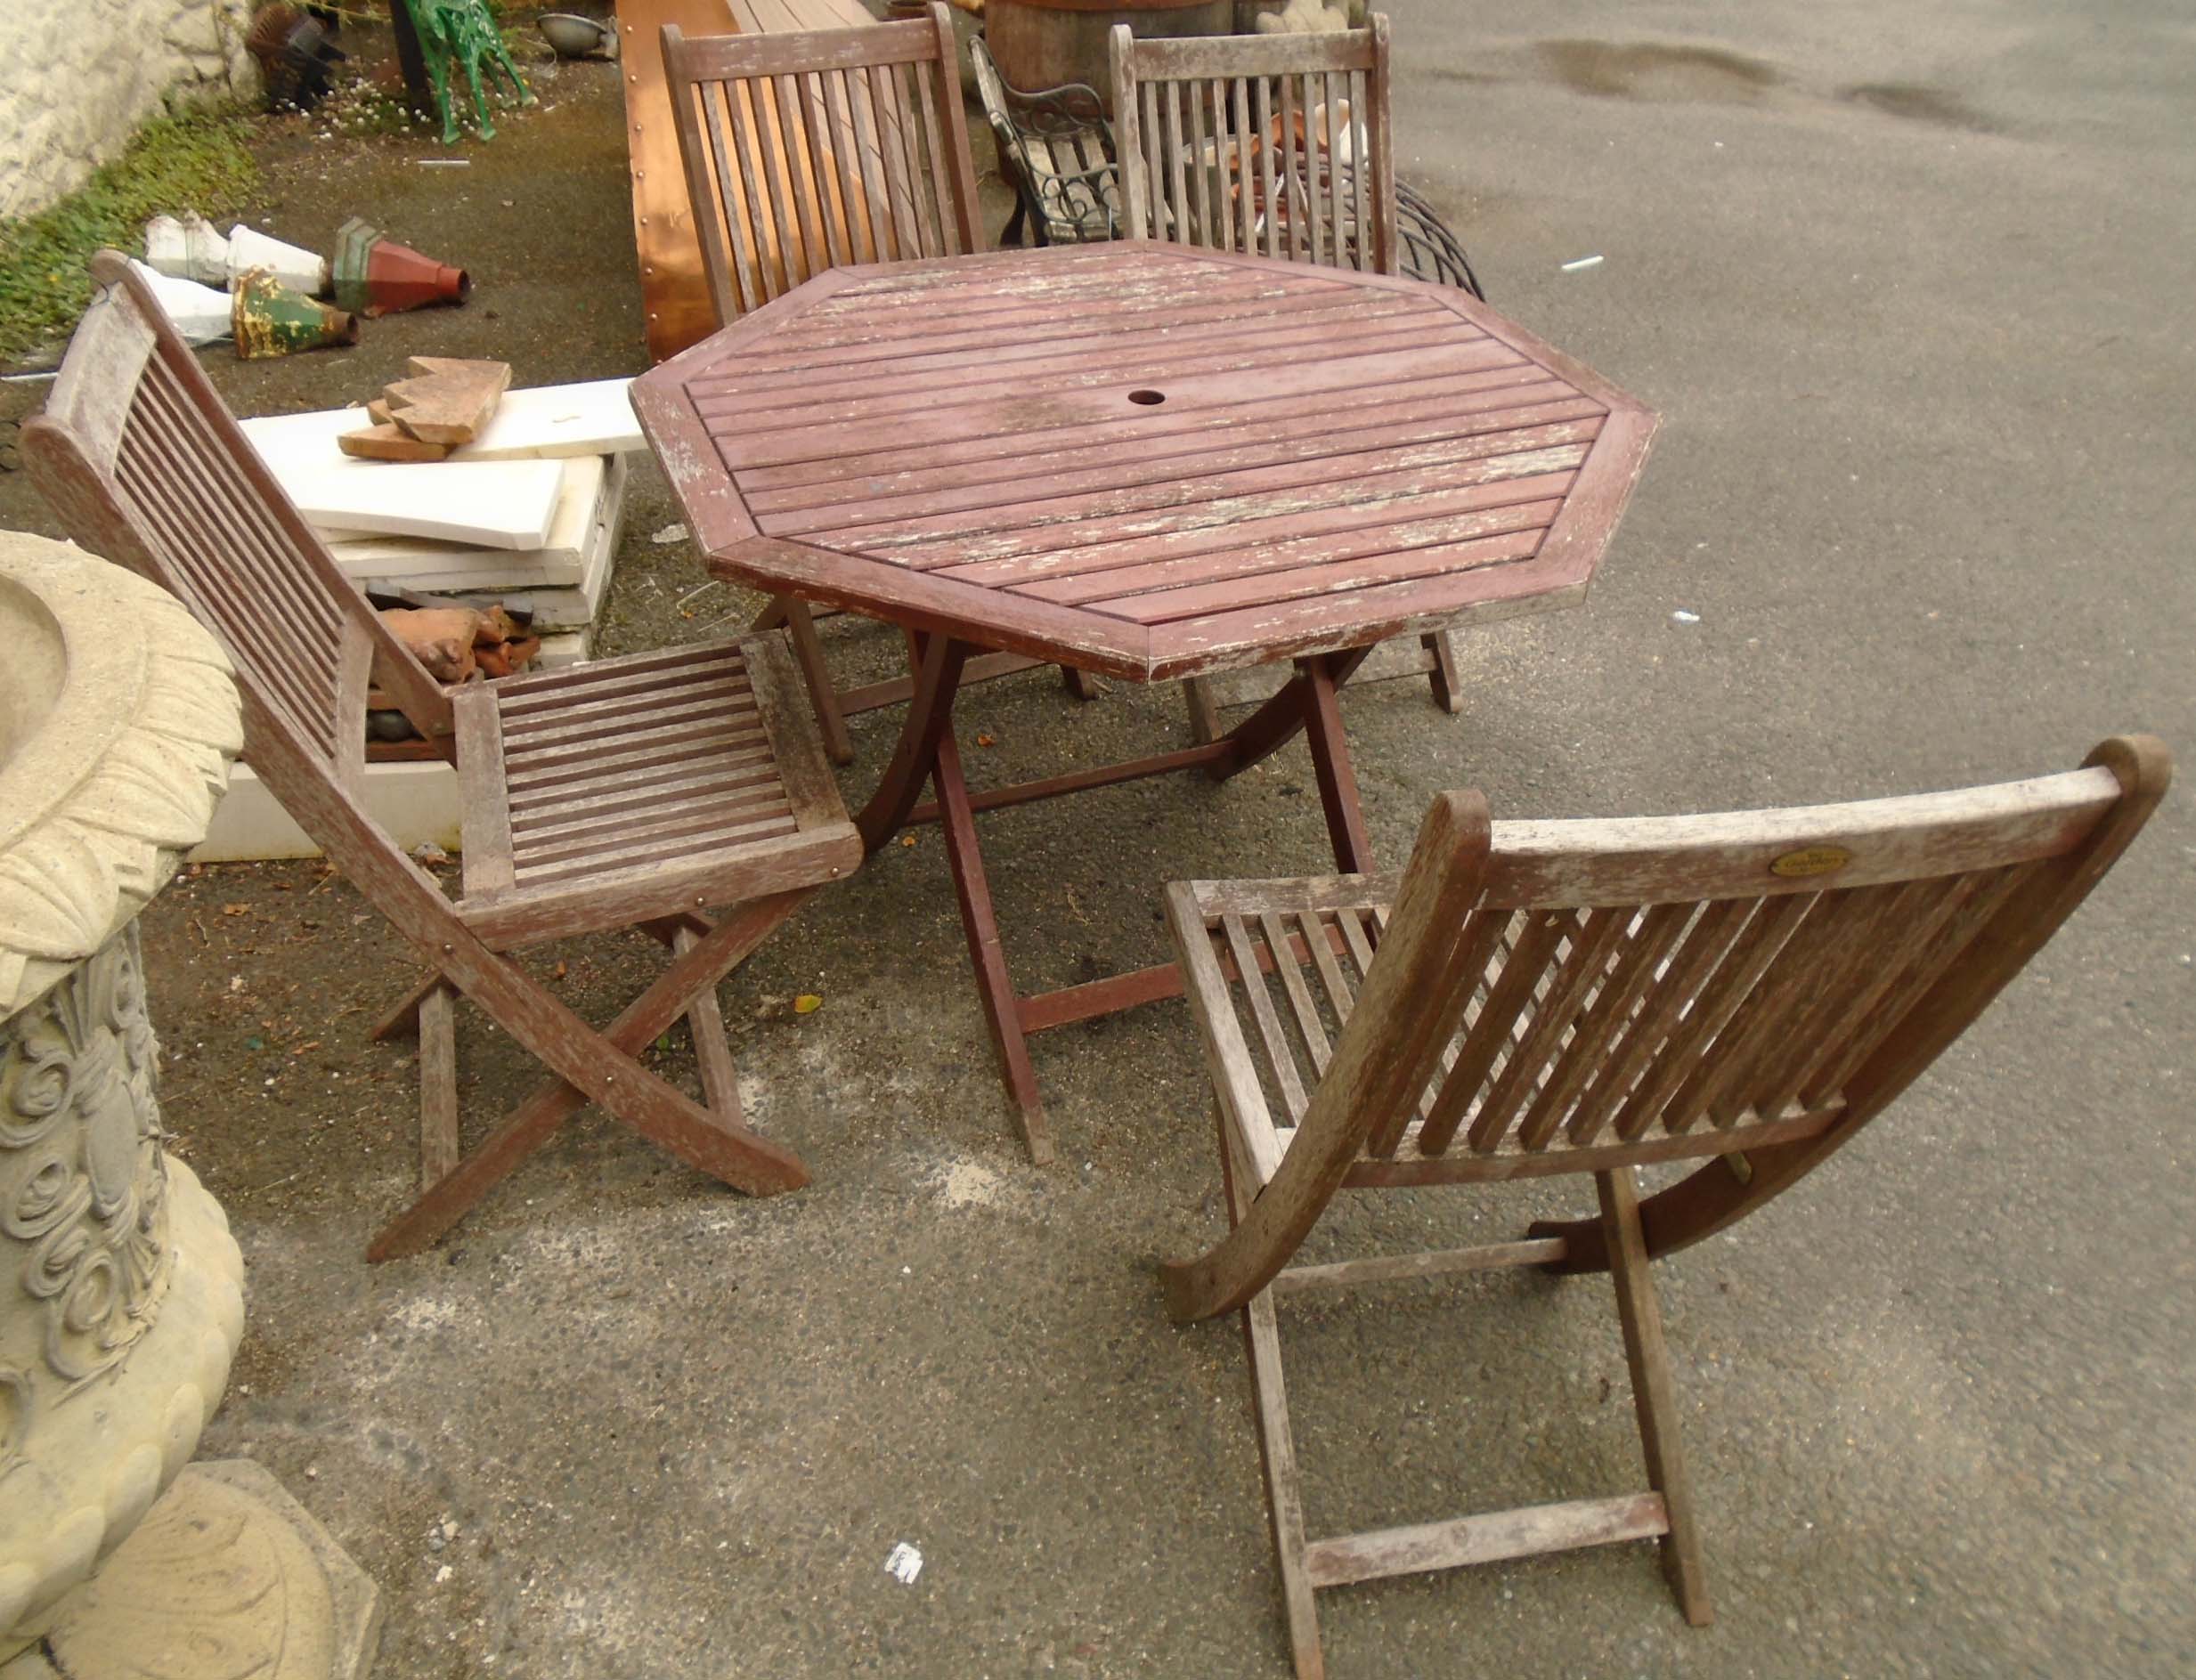 A set of four stained and slatted teak folding chairs - sold with an octagonal table to match